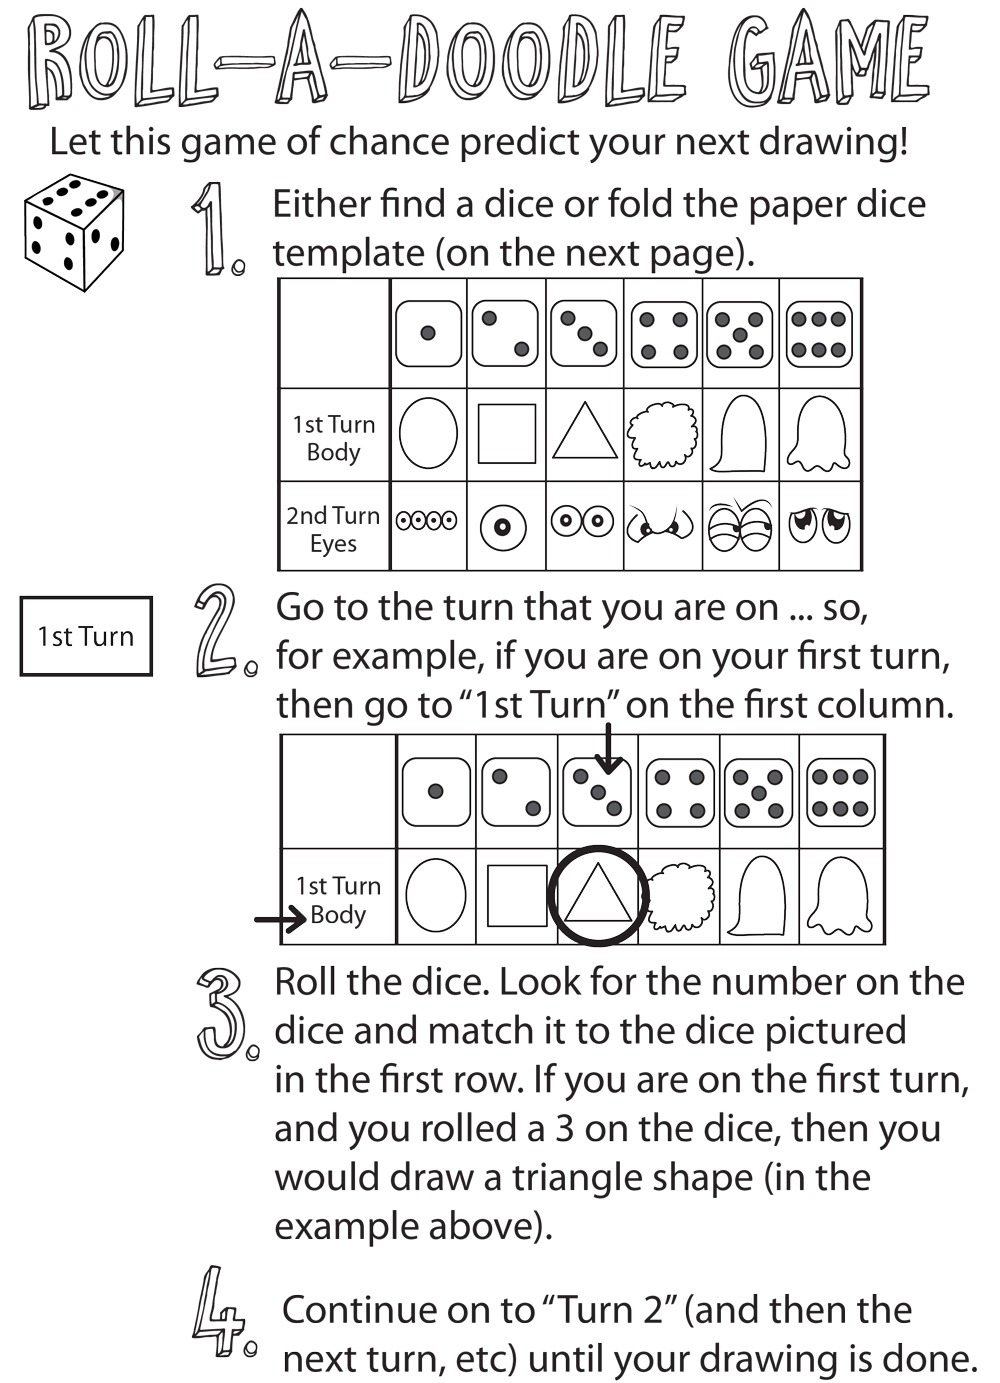 Here are the instructions for this dice rolling drawing game.